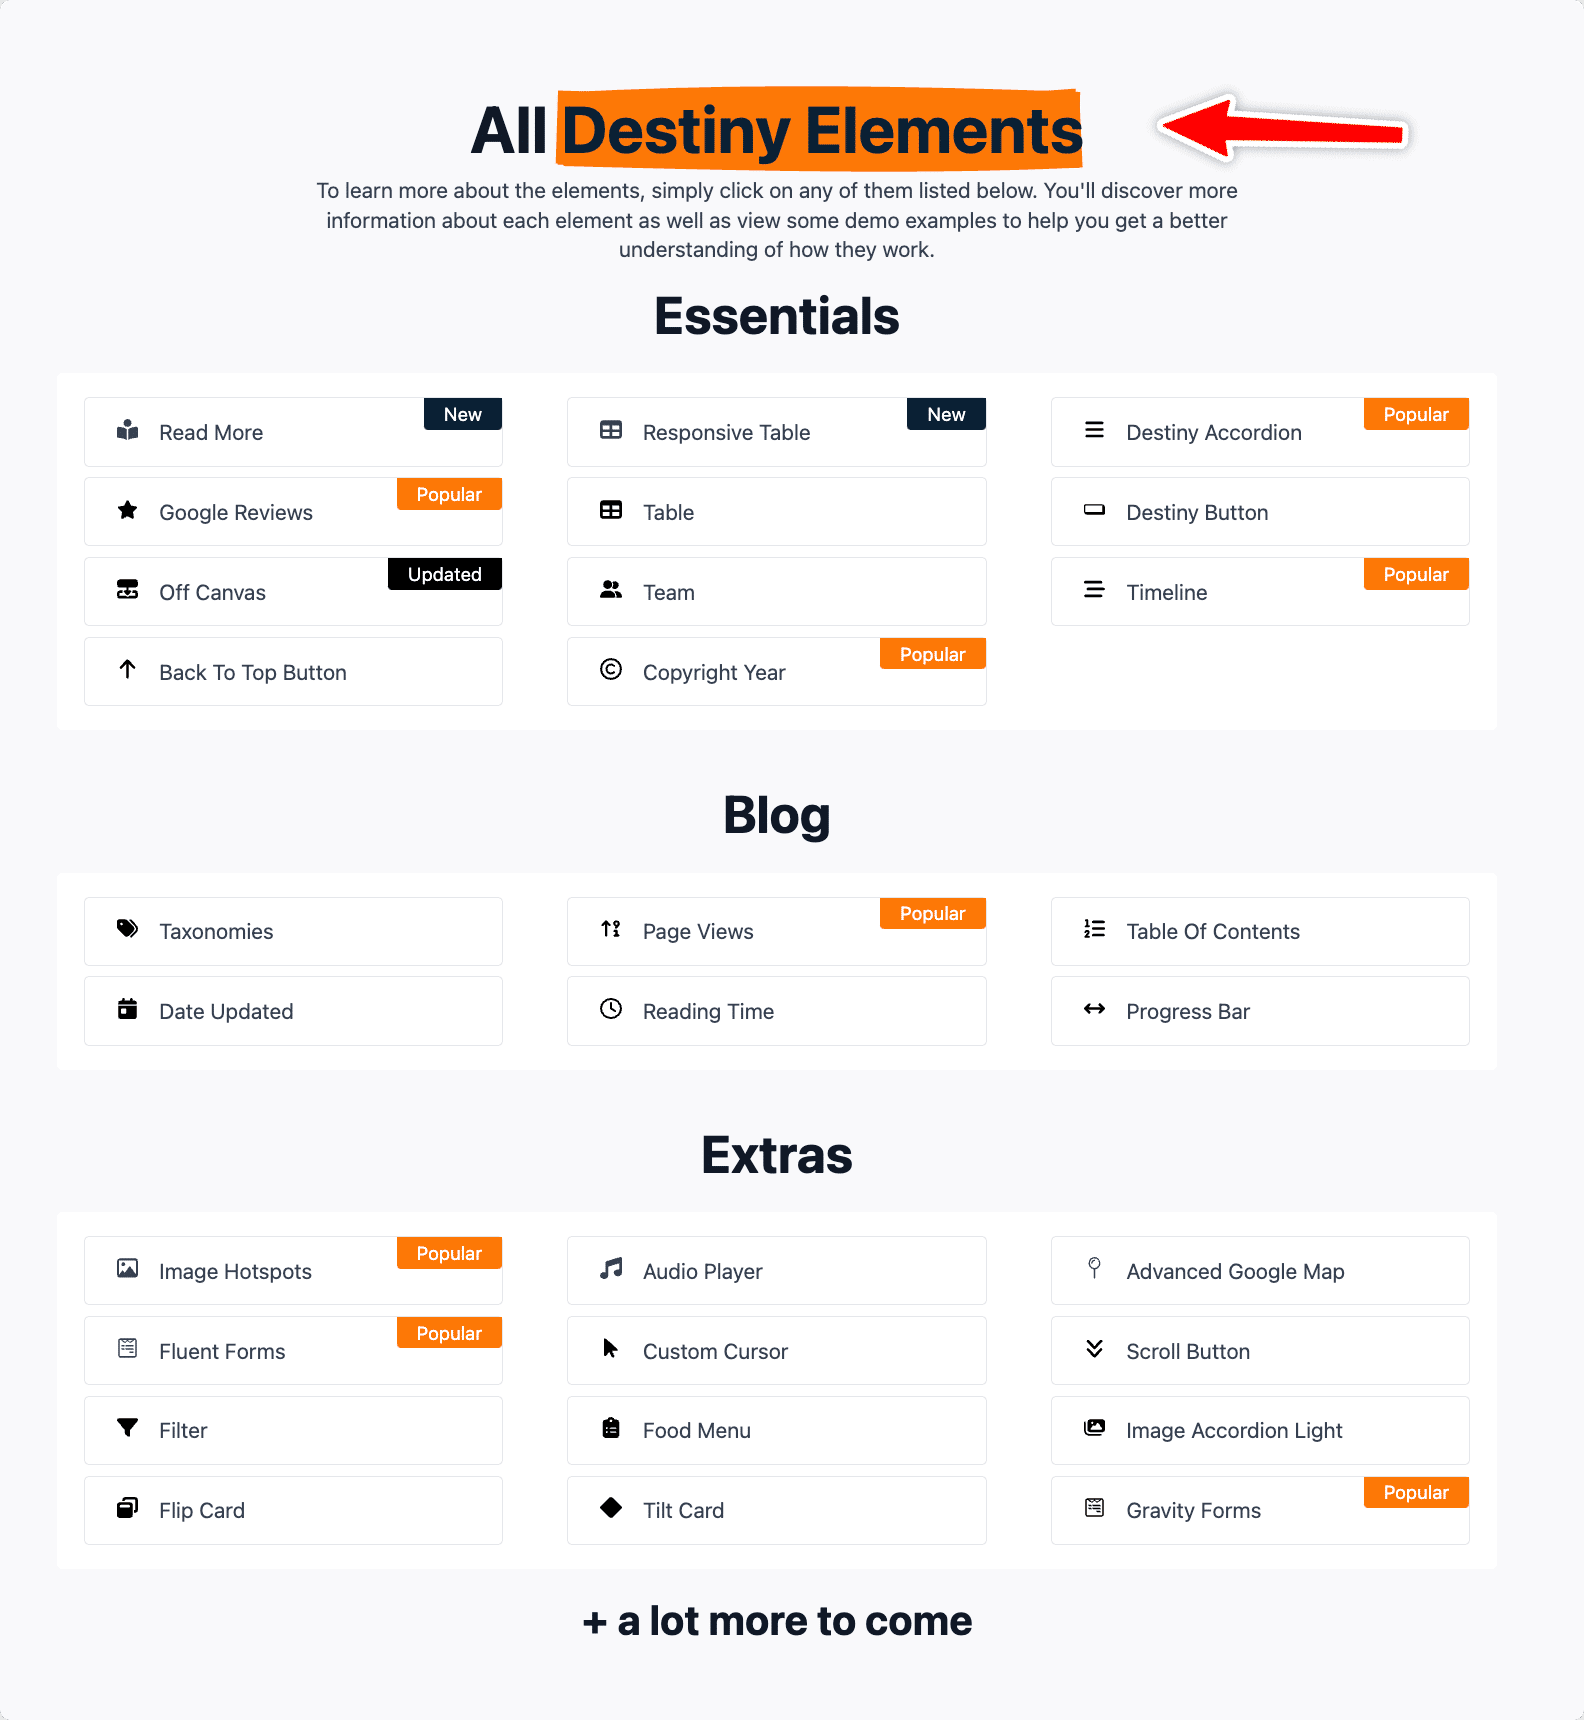 Full list of Destiny Element blocks to use with Breakdance Builder. Includes essentials, blogs, and extras